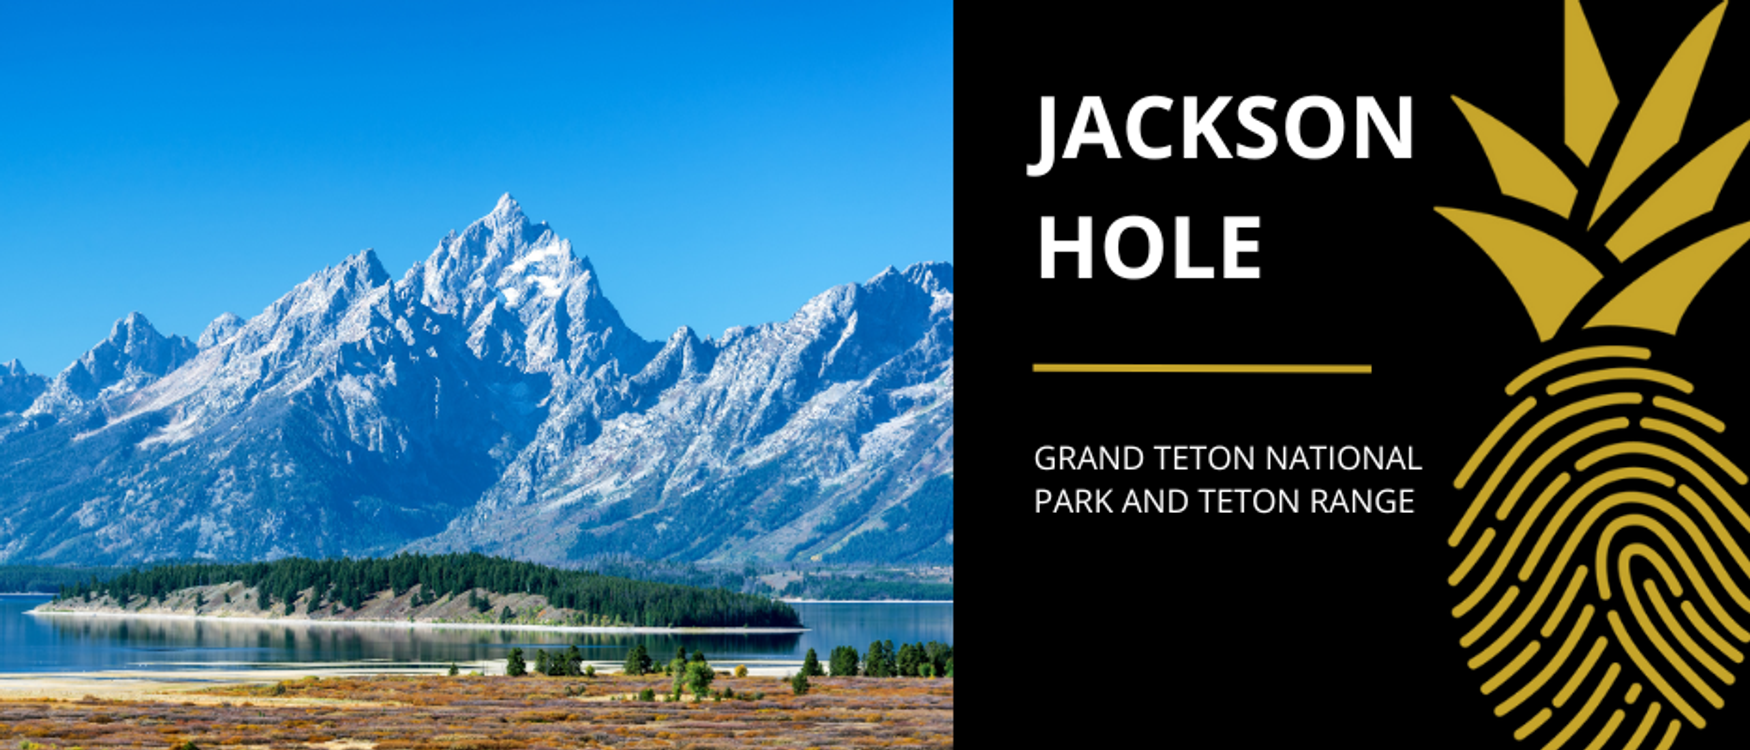 A view of Jackson Hole from above, with the Grand Teton National Park and Teton Range in the background